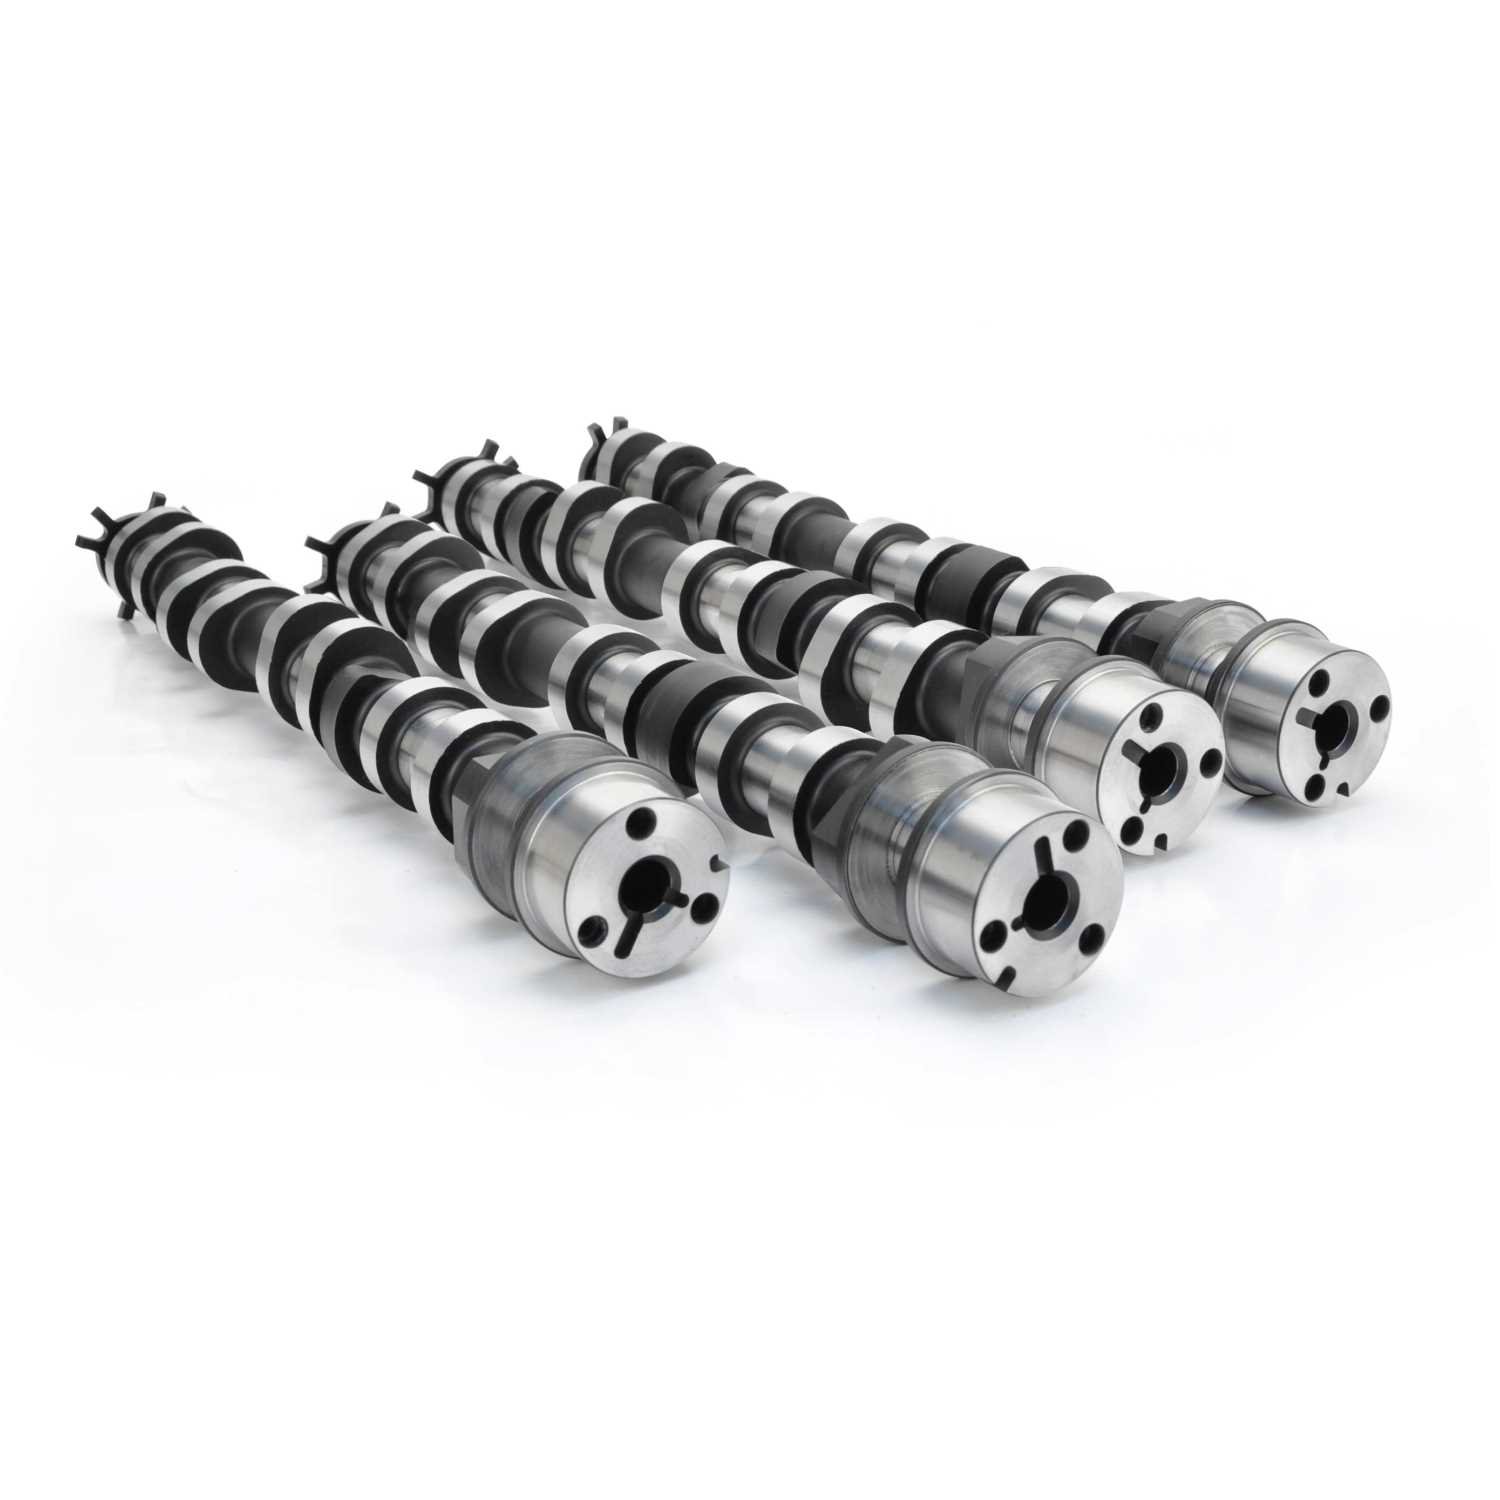 Hydraulic Roller Cams 5.0L Coyote Engine